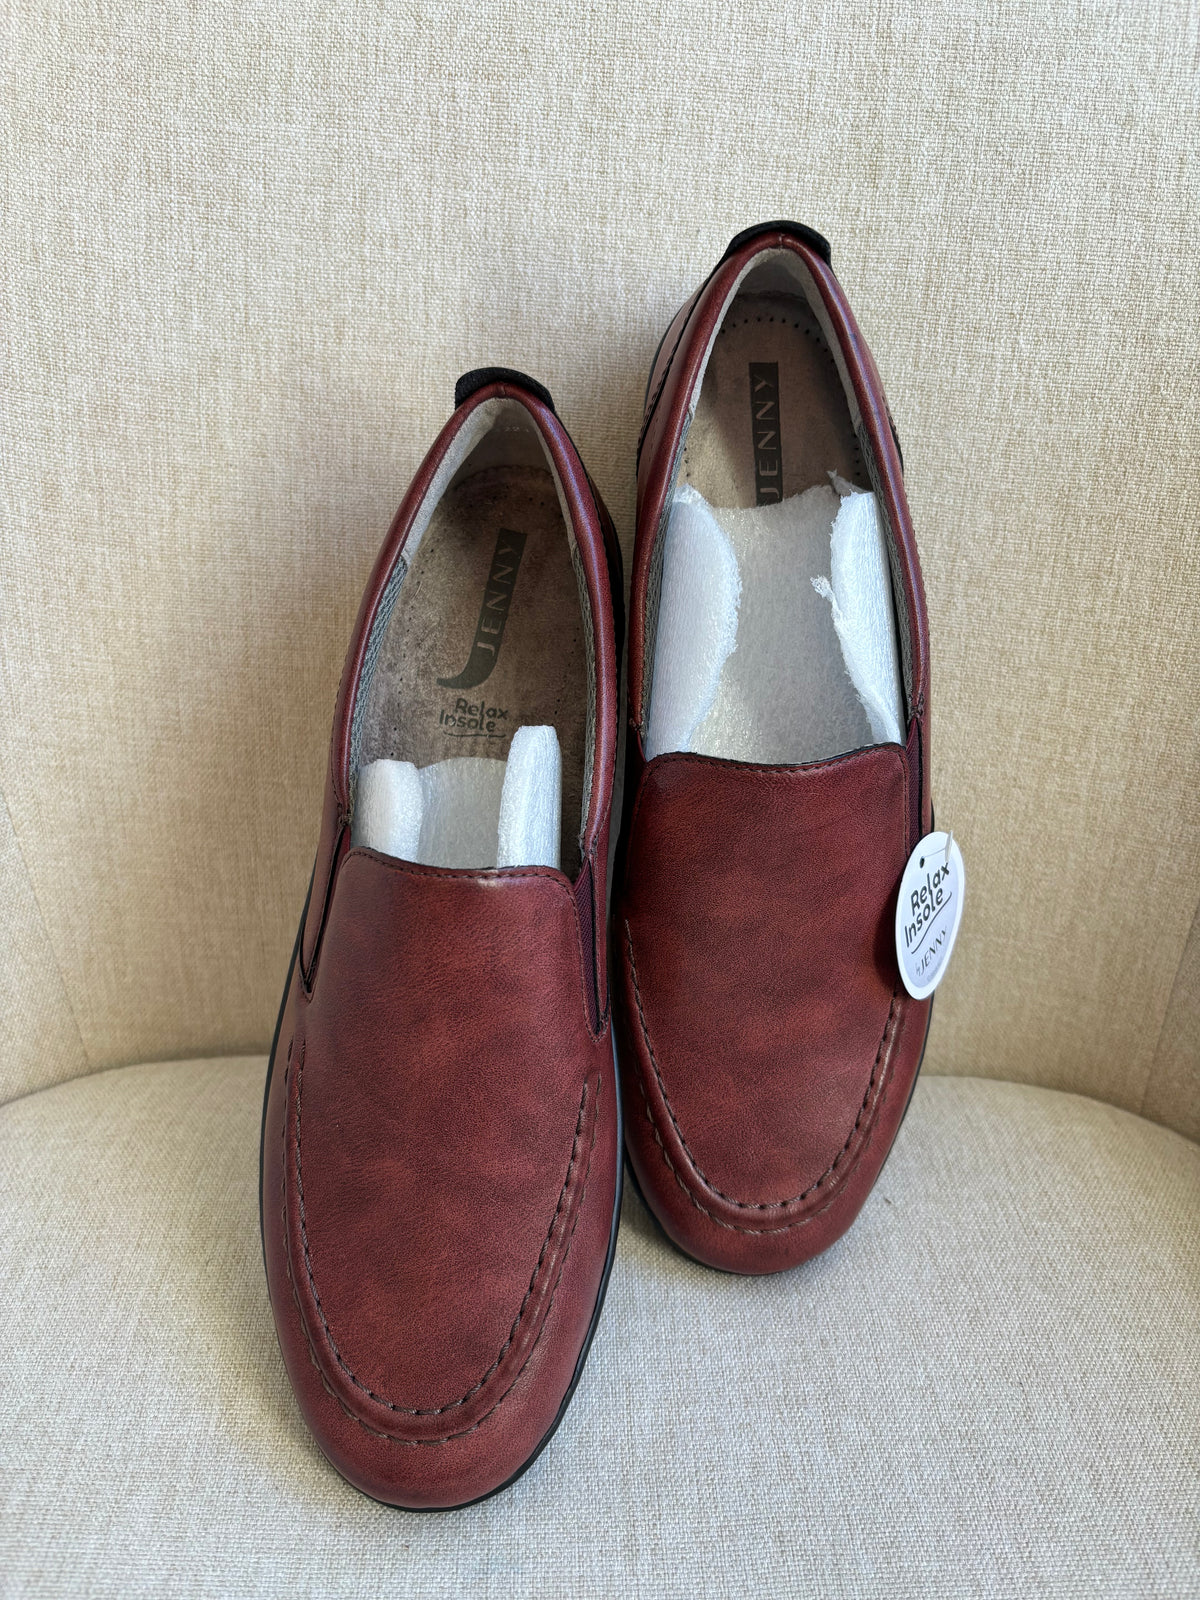 Real leather luxury loafers by Jenny